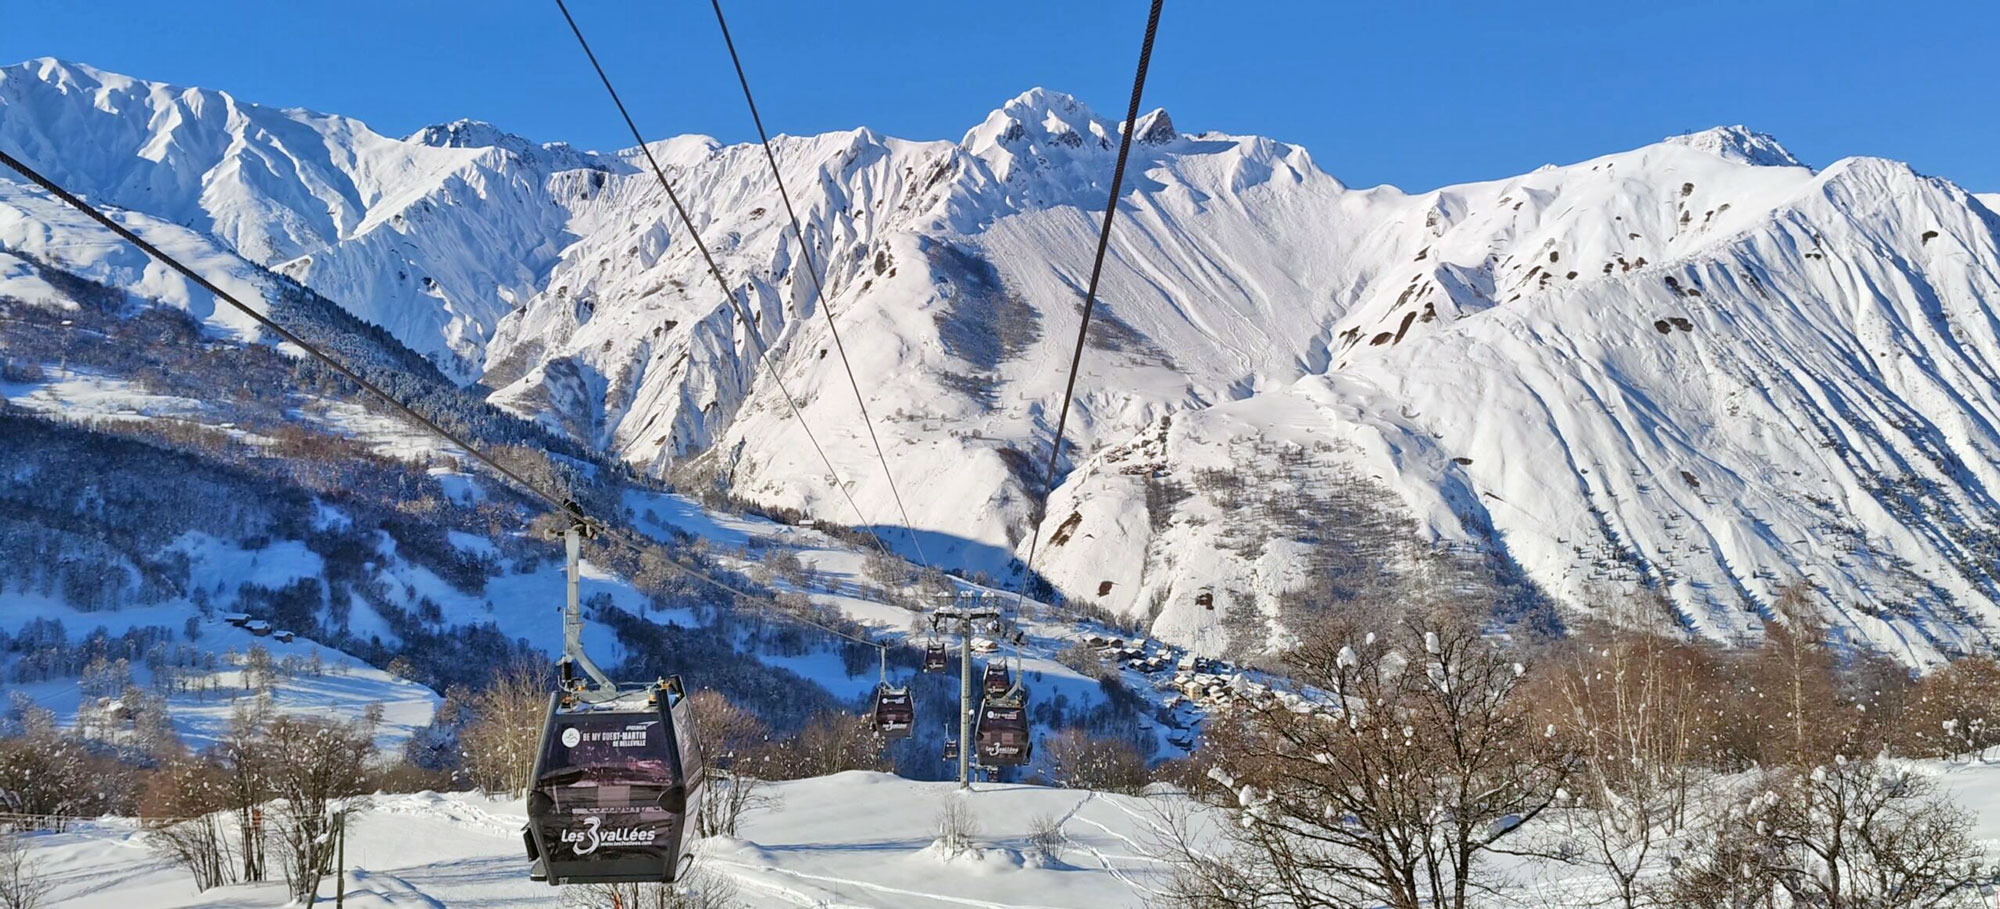 saint martin gondola brings you up into the heart of the 3 valleys